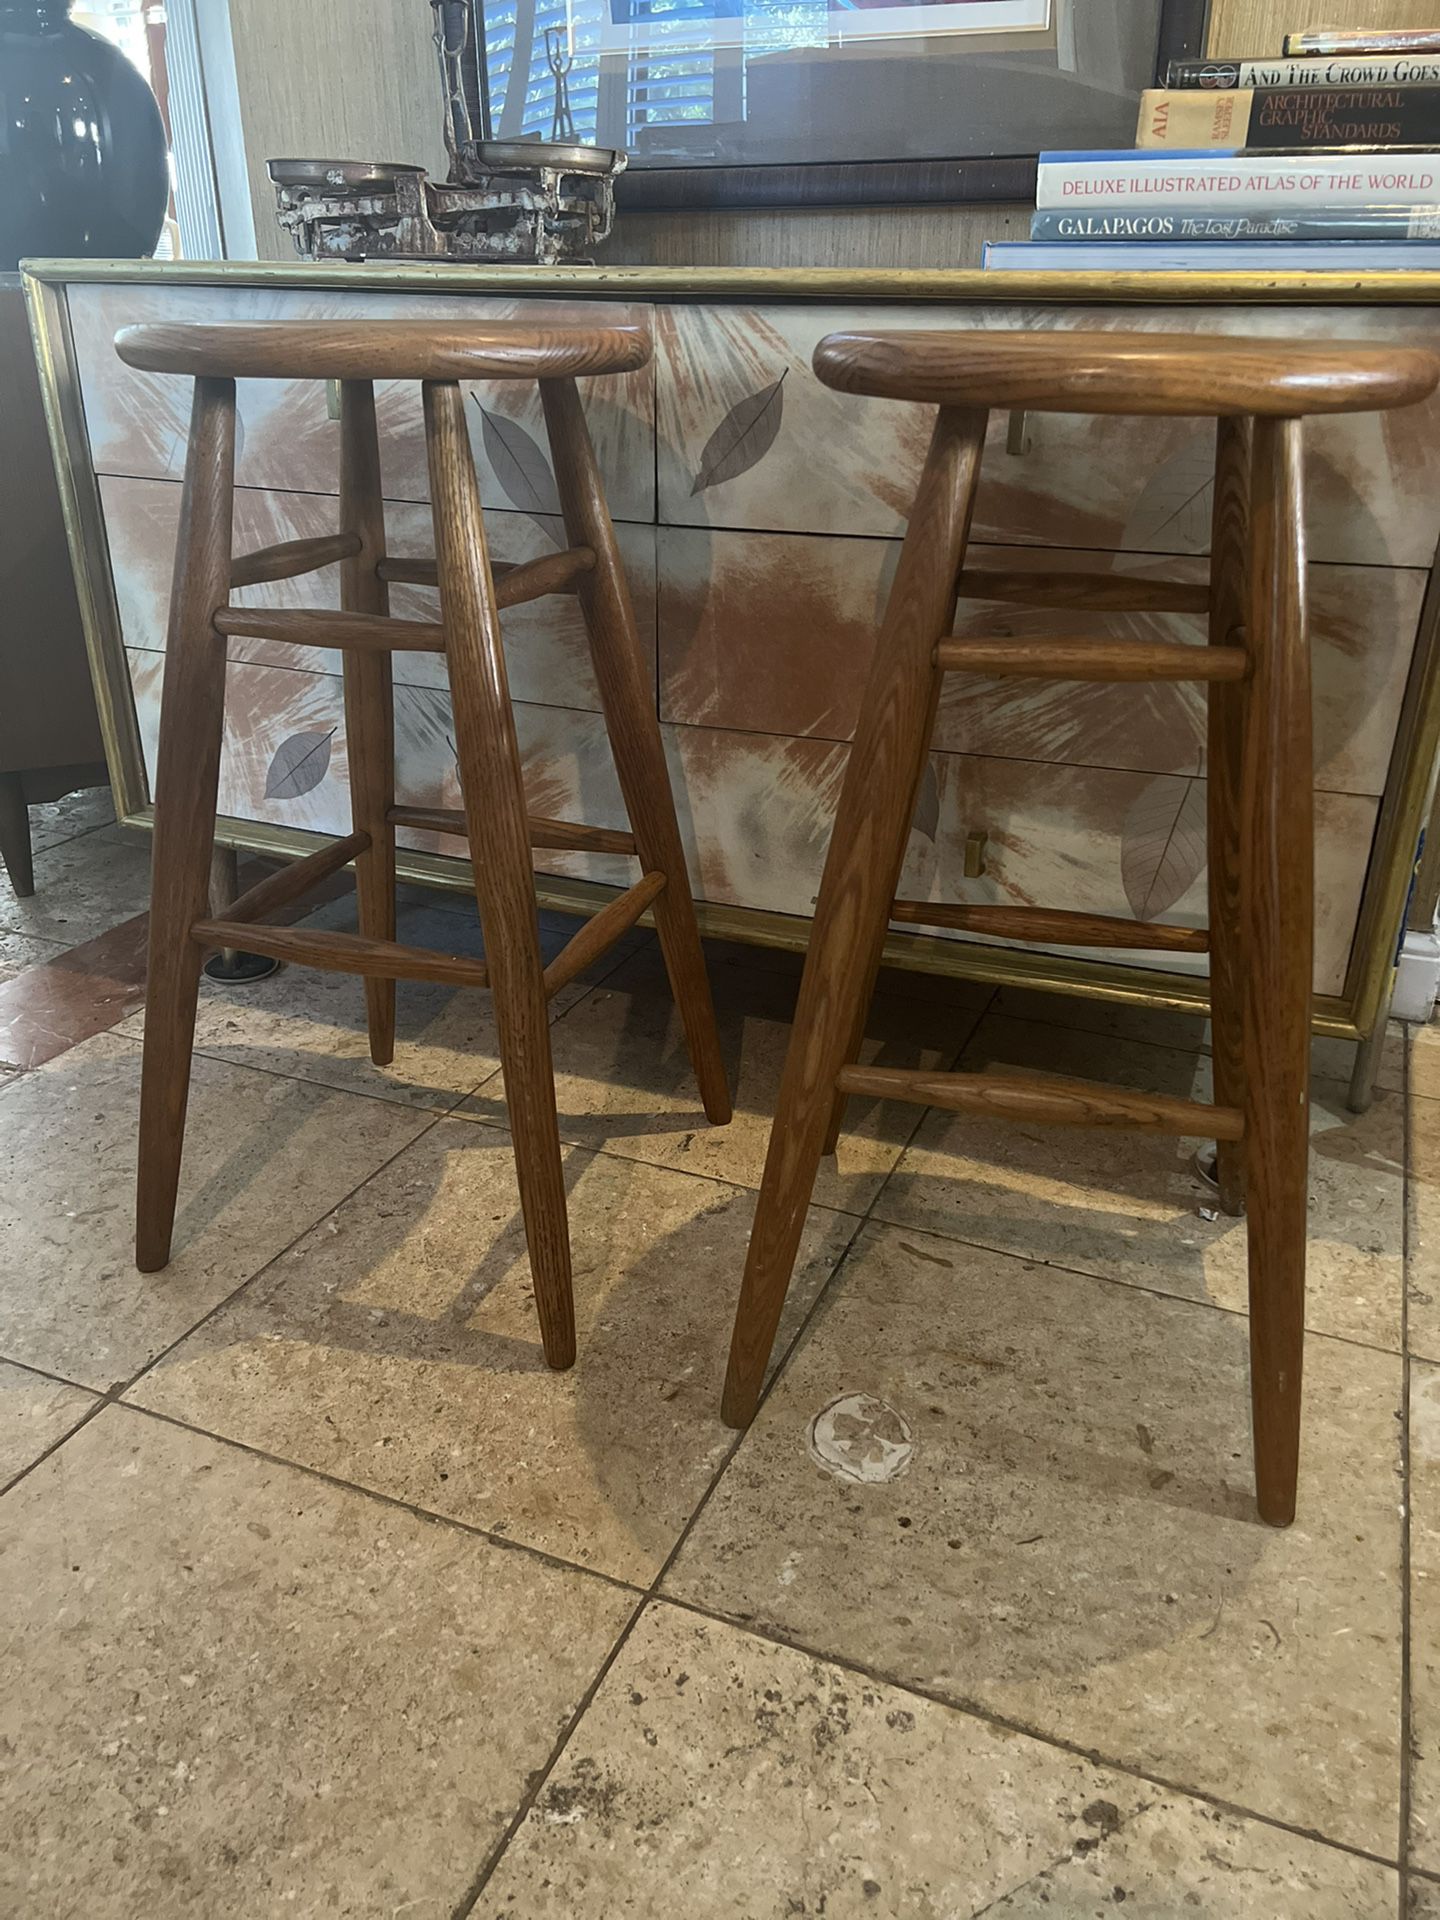 Authentic Pair Of Mid Century Modern Barstools By Tell City